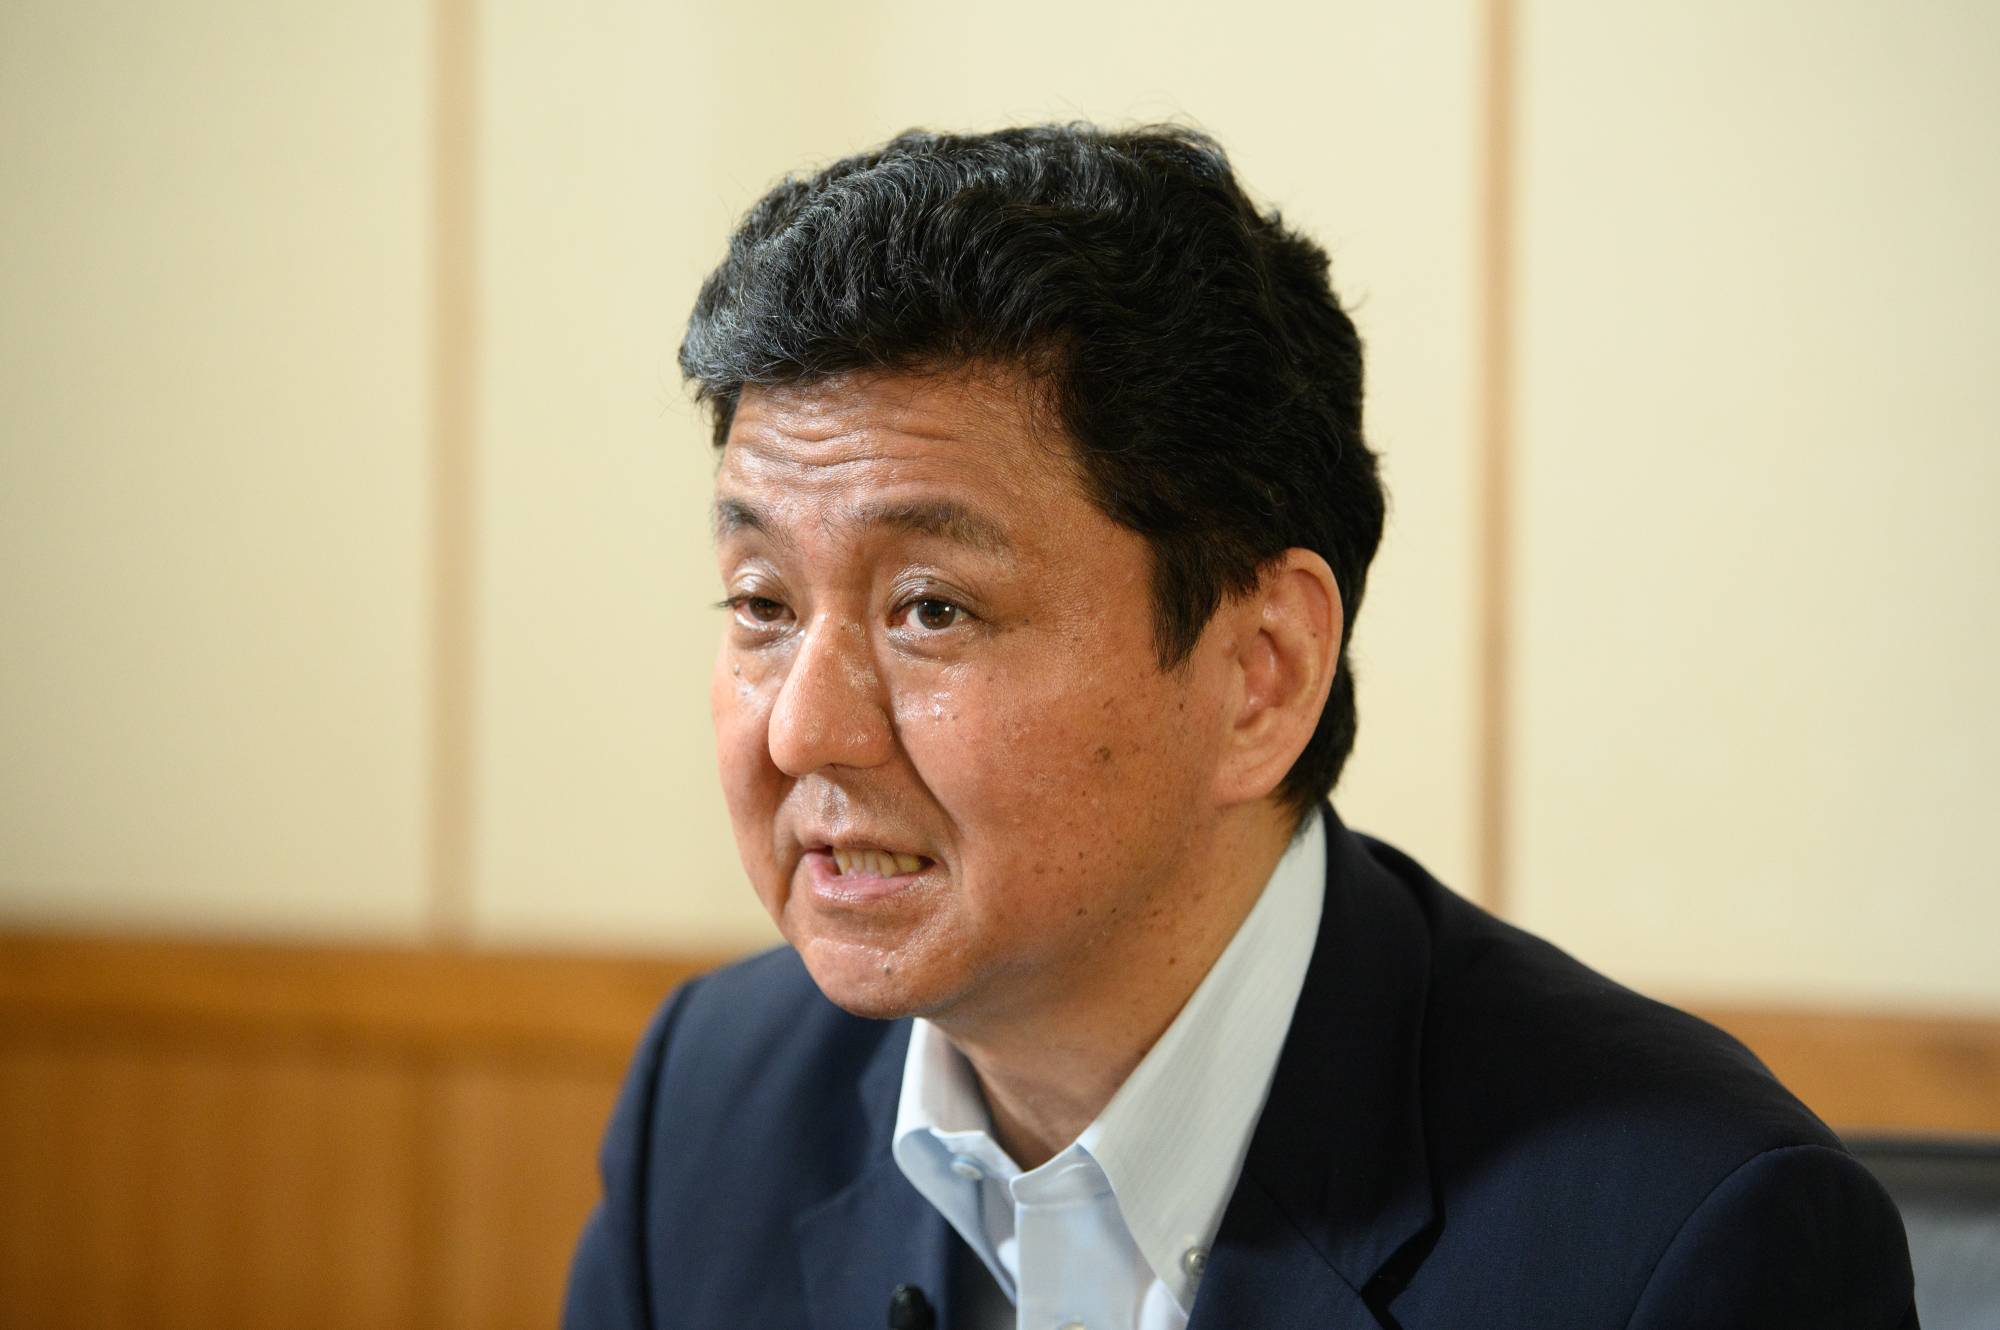 Defense Minister Nobuo Kishi speaks during an interview in Tokyo on Thursday. | BLOOMBERG